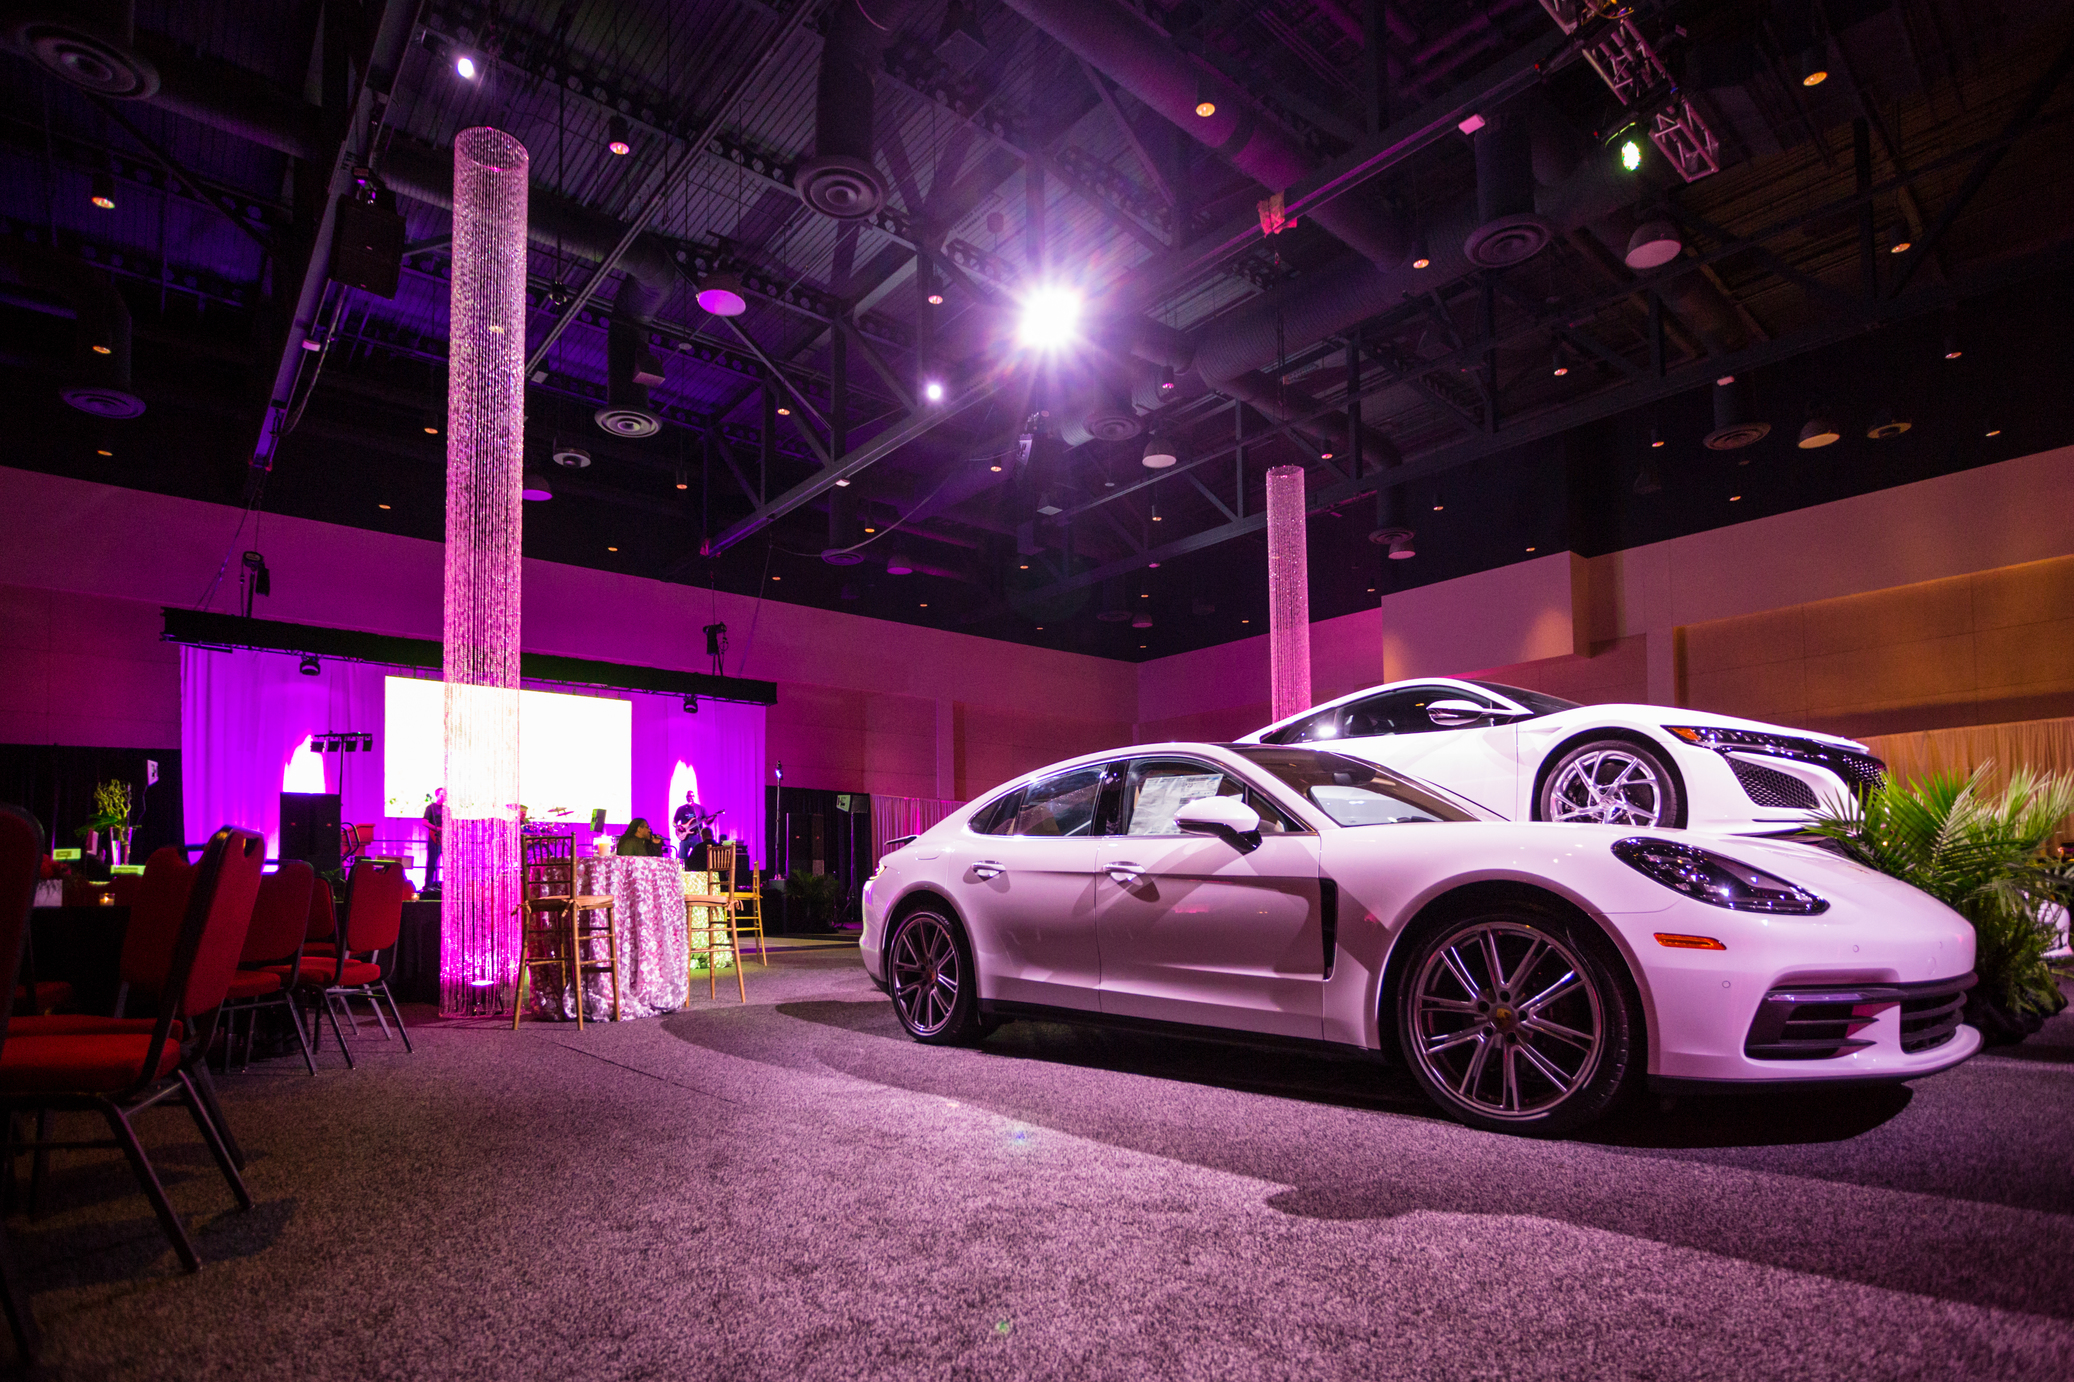 White cars on exhibit with visual equipment creating atmosphere.